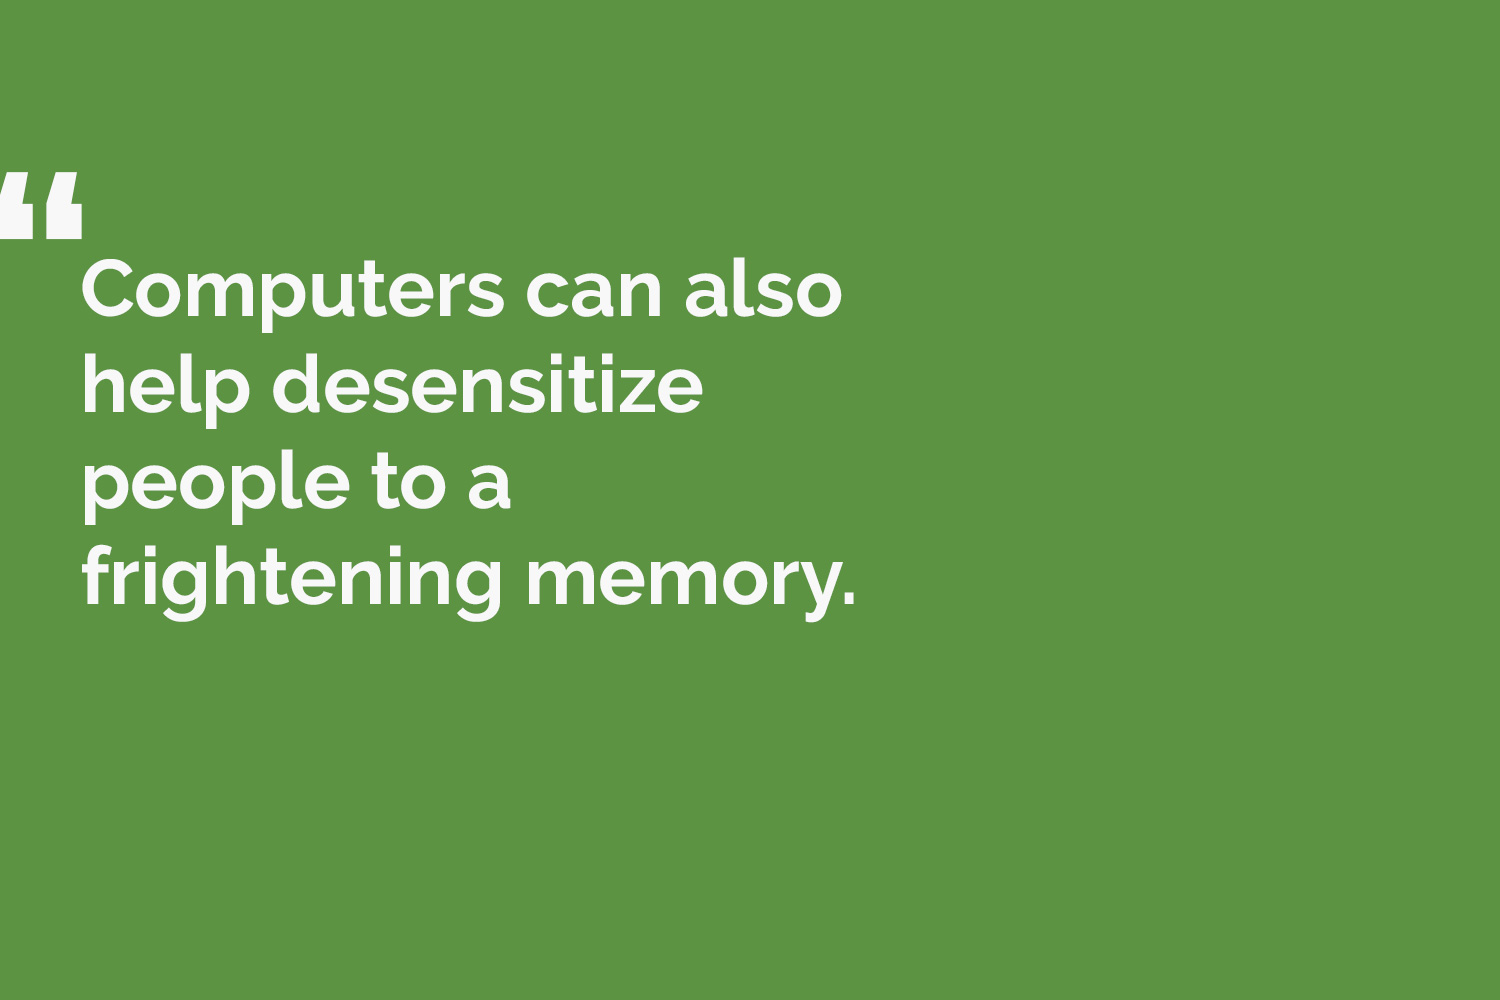 quote card reads: Computers can also help desensitize people to a frightening memory.